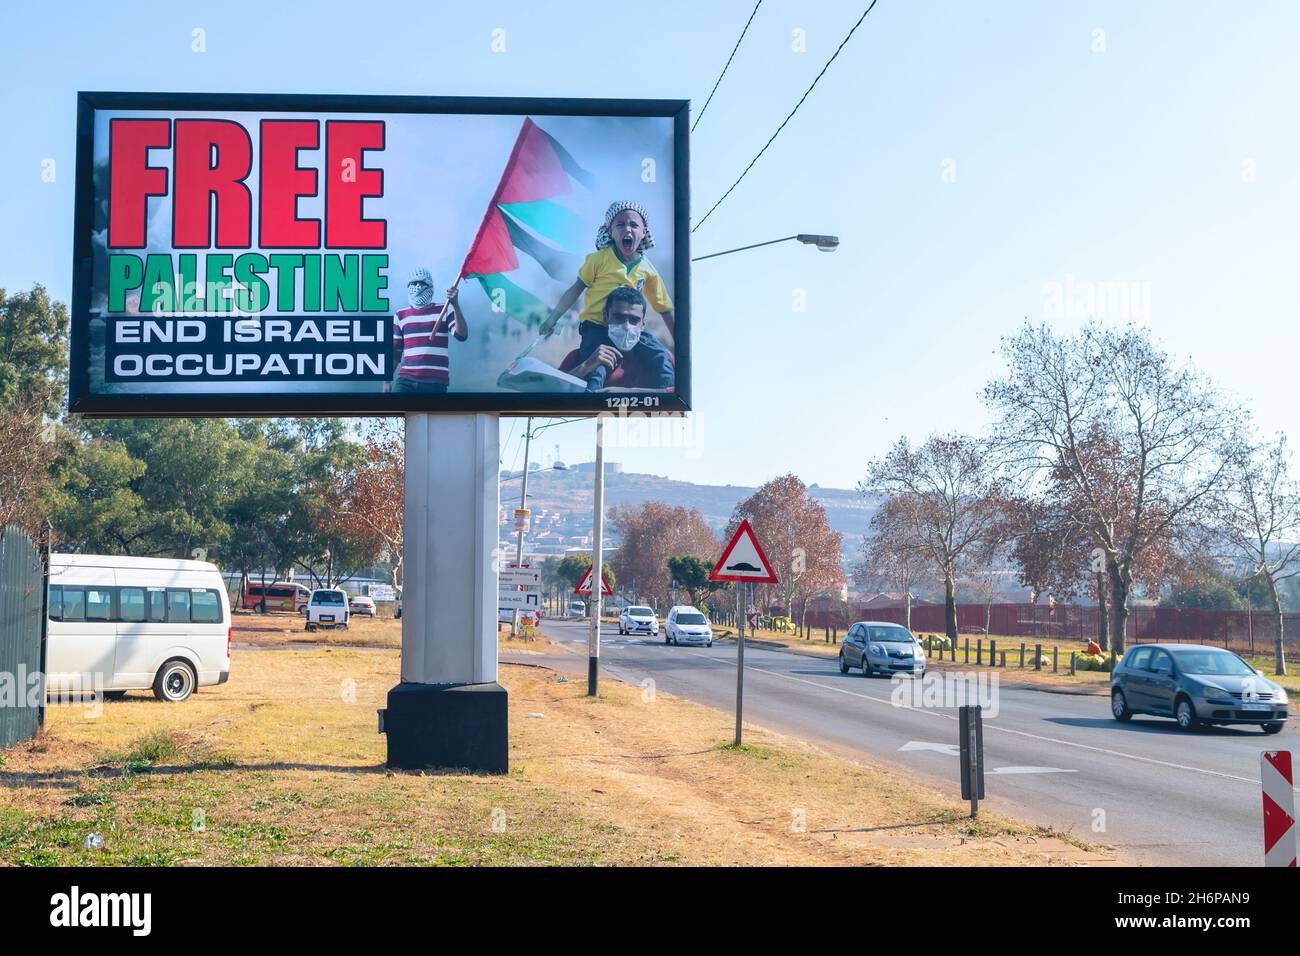 Johannesburg, South Africa - 22nd June, 2021: Billboard highlighting the movement to free Palestinian lands from perceived occupation. Stock Photo